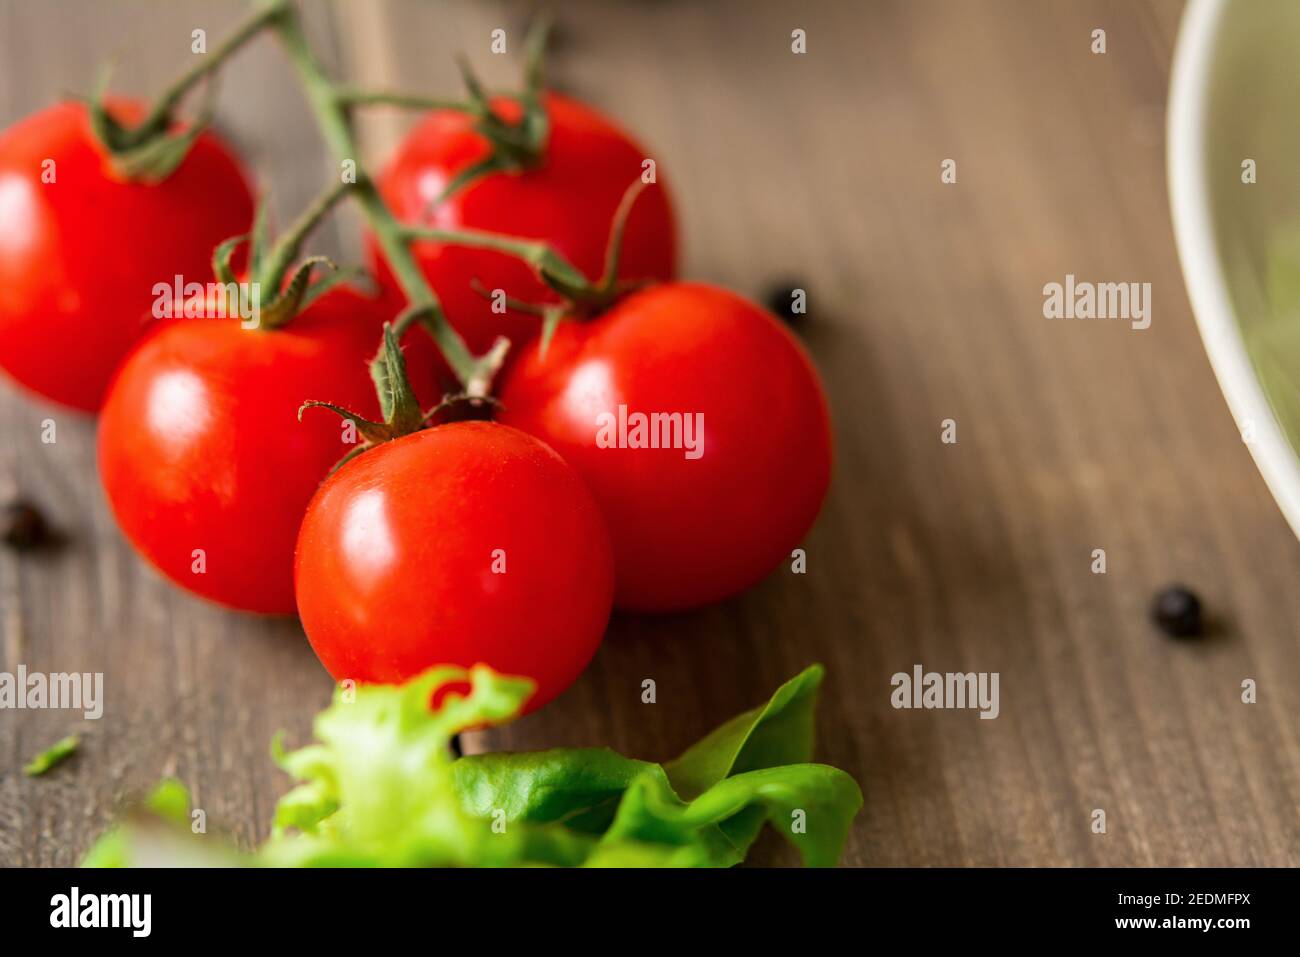 Organic healthy red cherry tomato bunch for salad on wood table, closed up shot Stock Photo